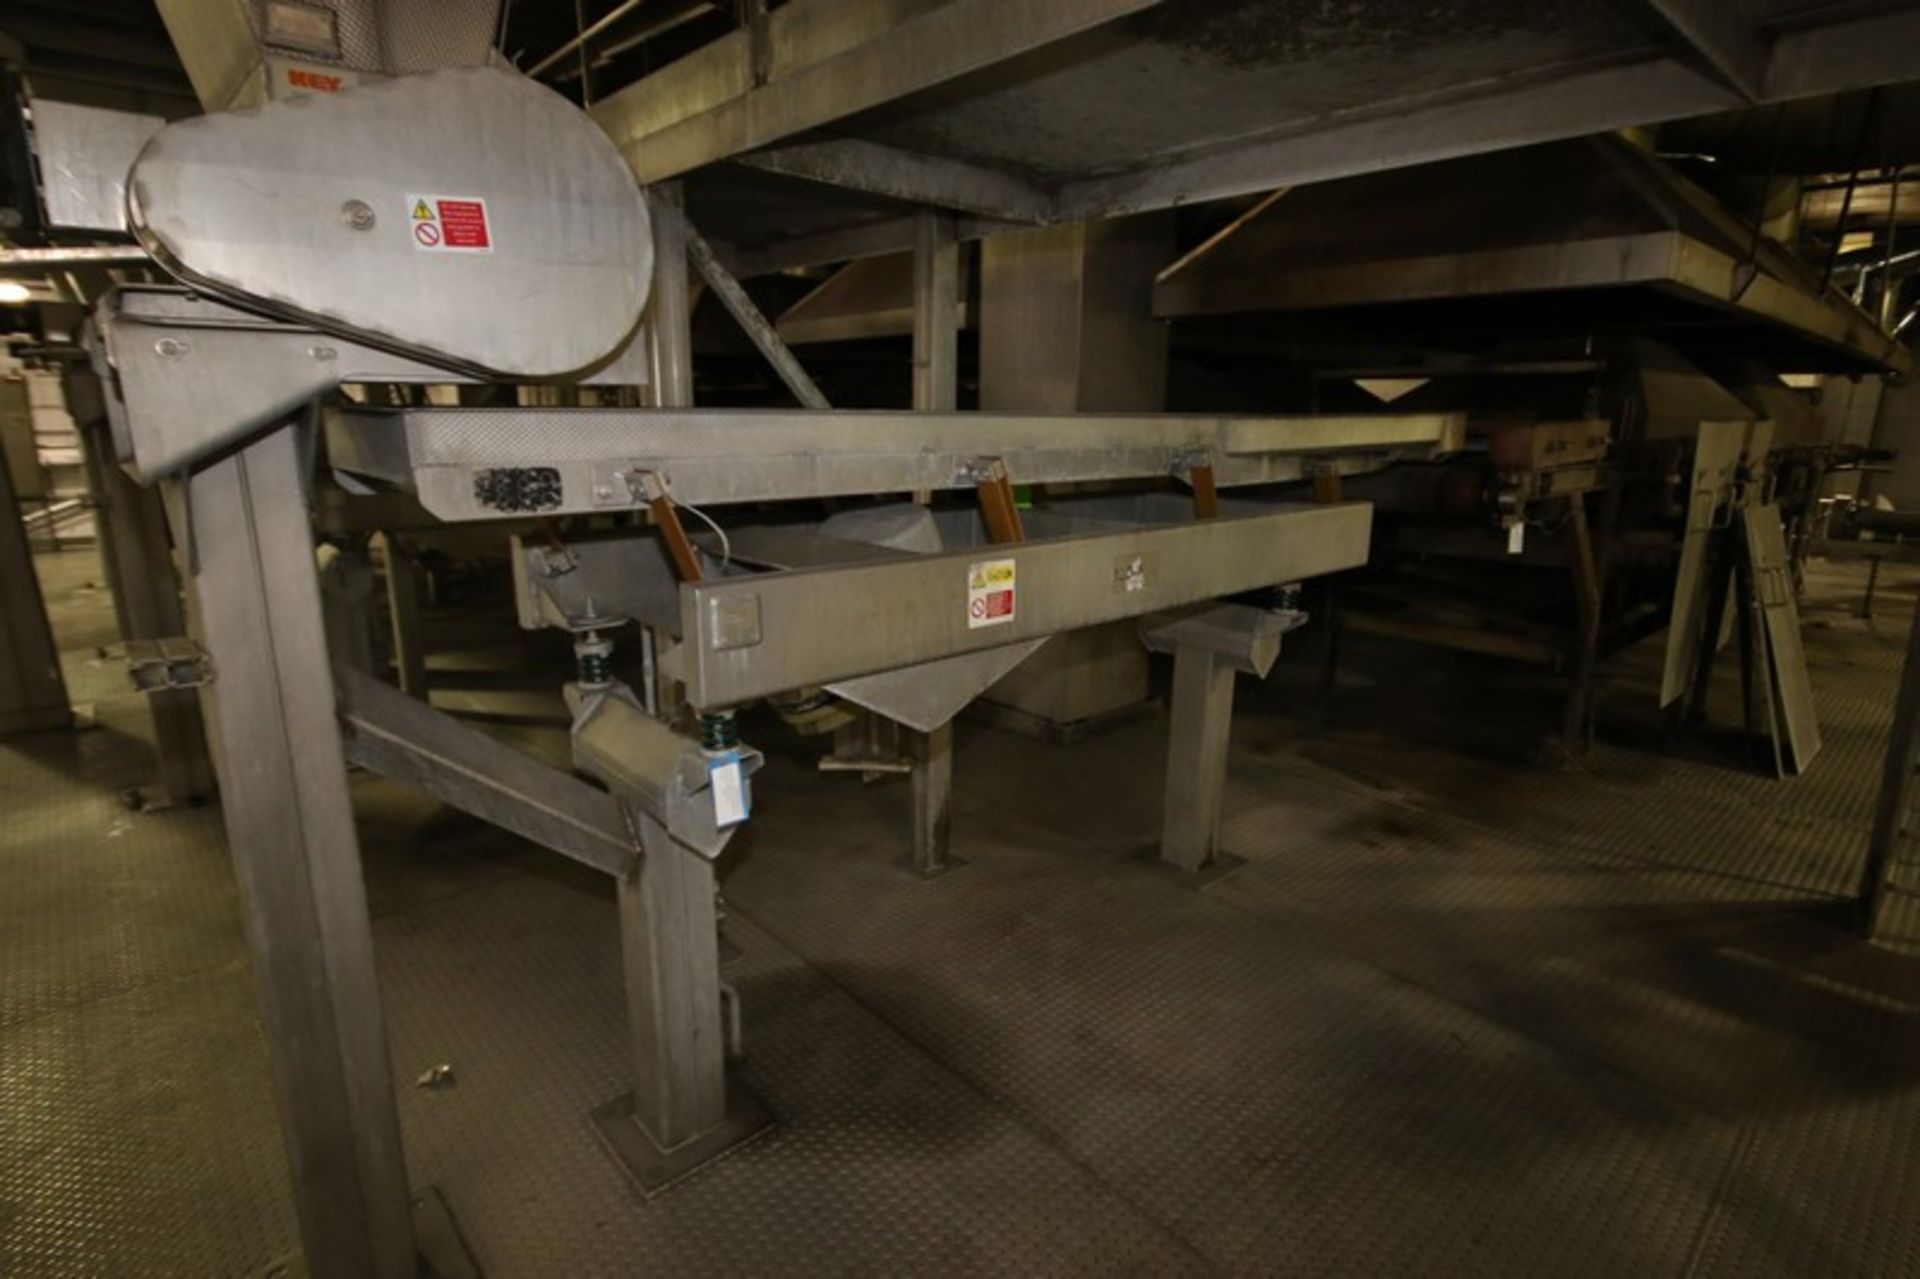 Key S/S Spreader Shaker Feed System, Includes Key S/S Spreader Shaker Deck, M/N 432252-1, S/N 03- - Image 2 of 10